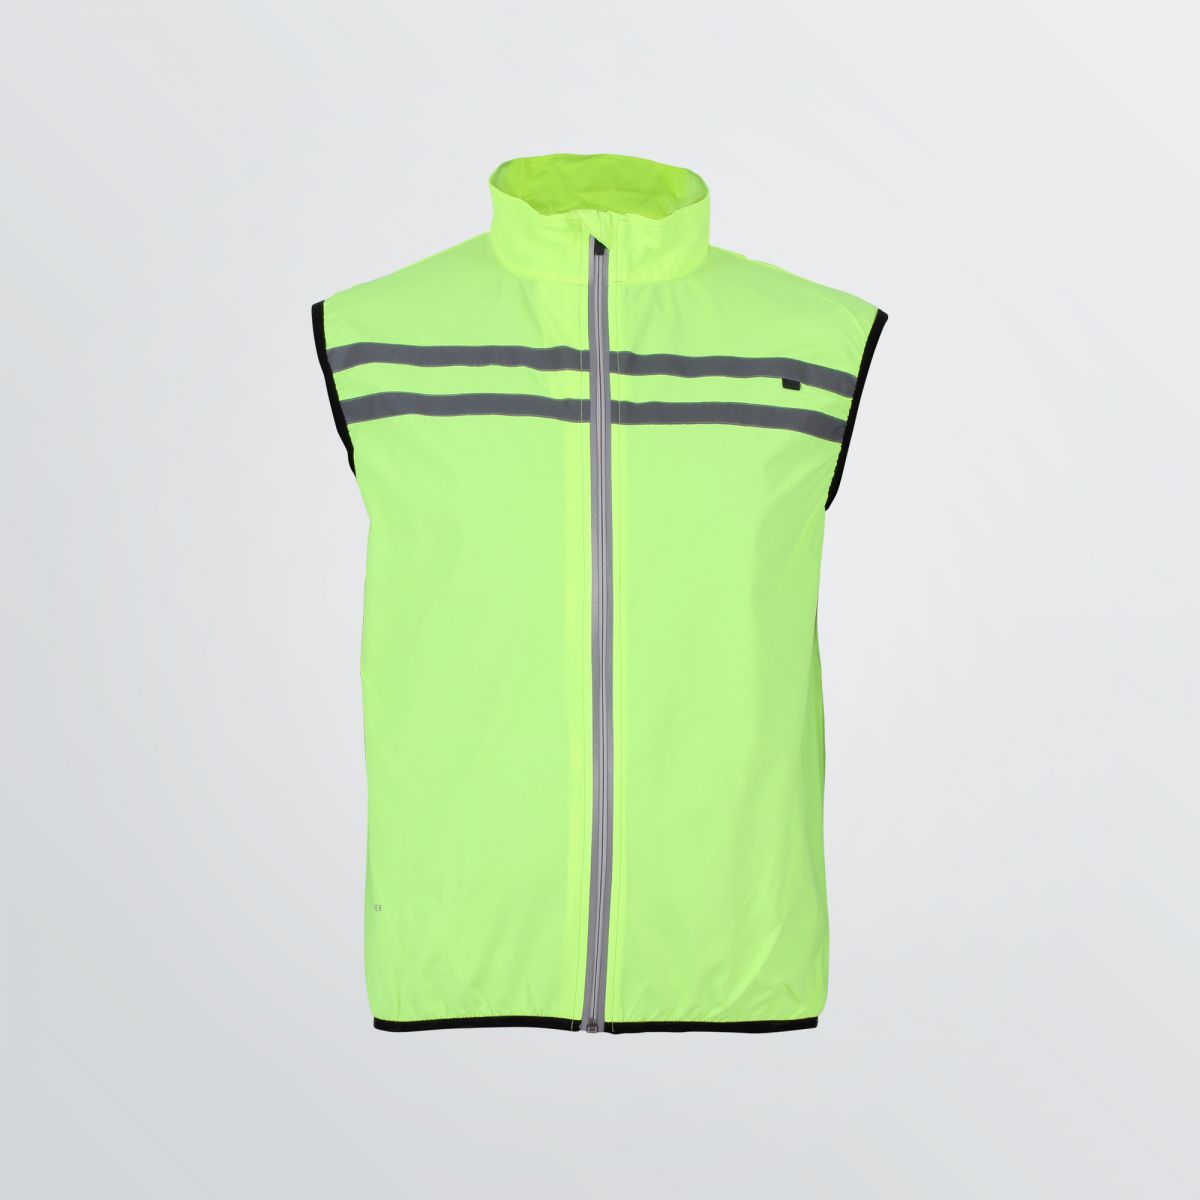 breathable Basic Sport Vest for customisation as a product example in neon yellow colour with reflectores - front view